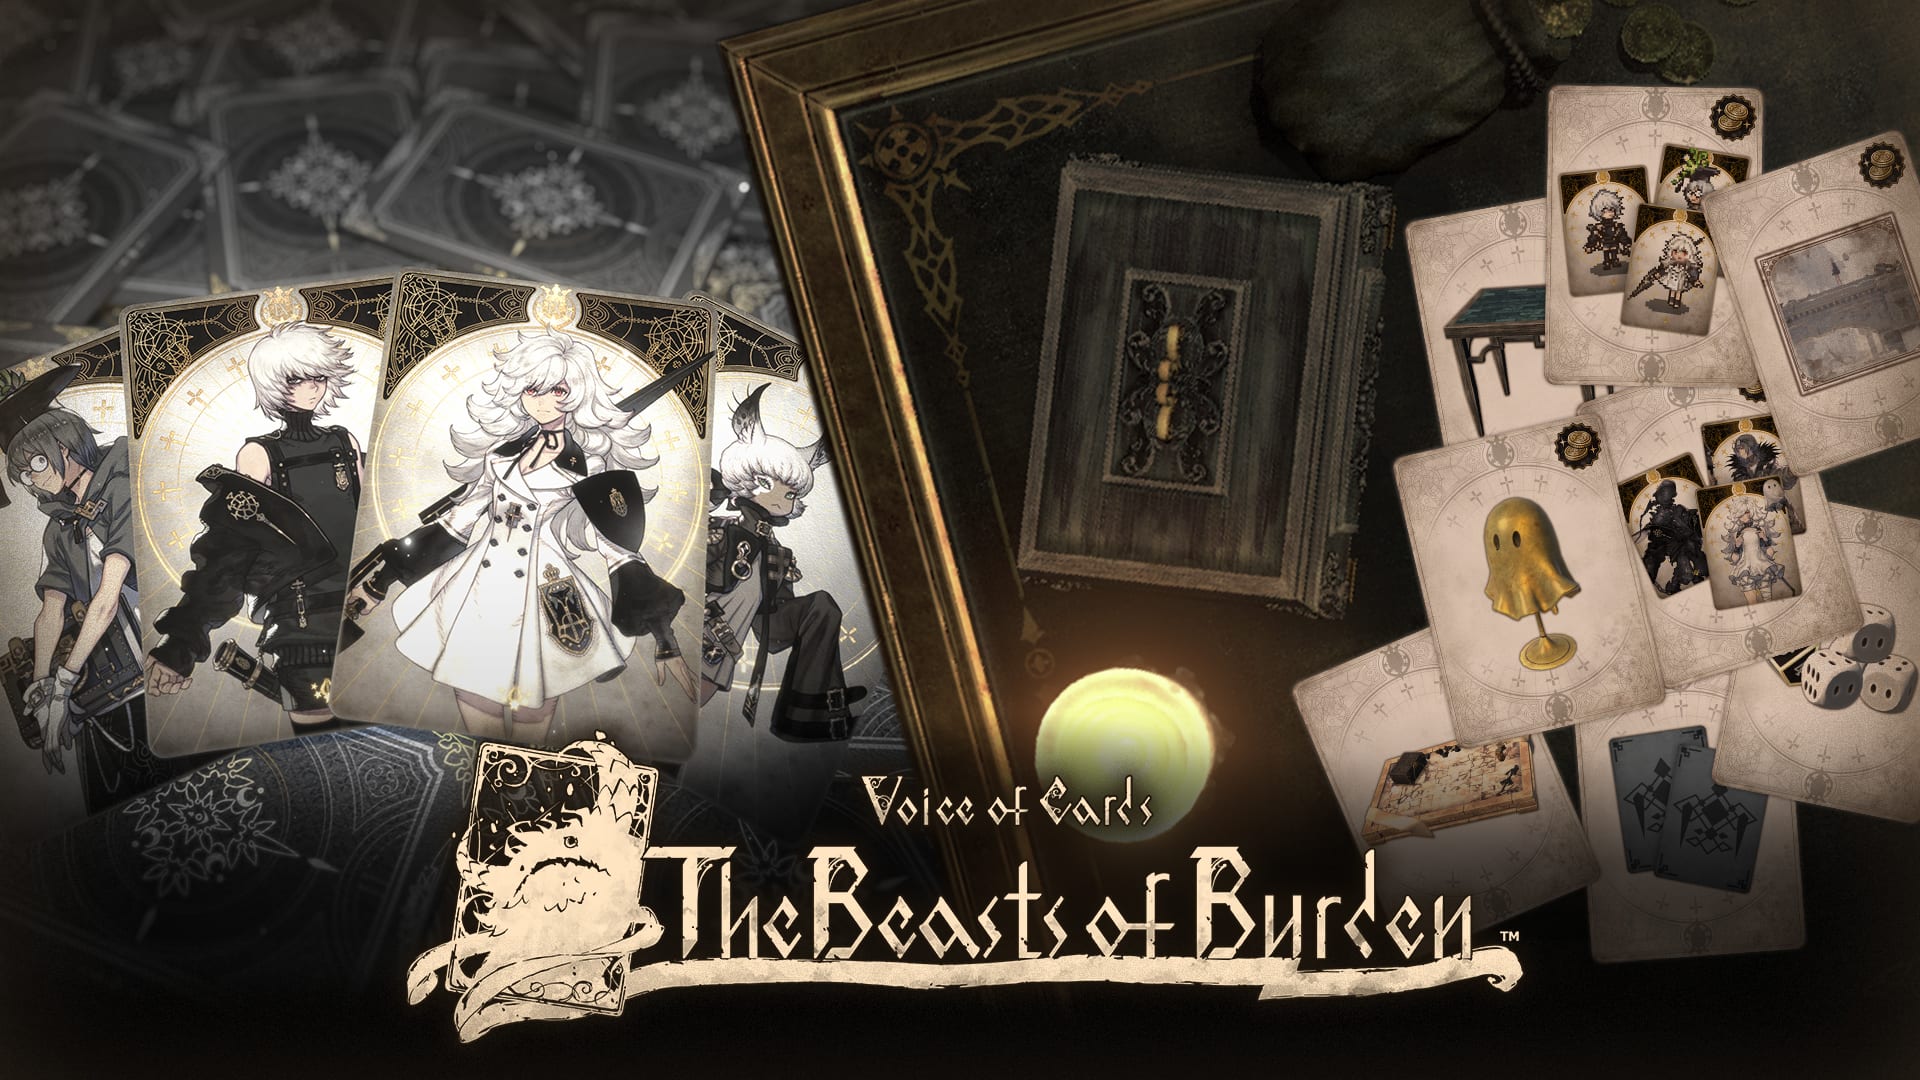 Voice of Cards: The Beasts of Burden ＋ DLC set